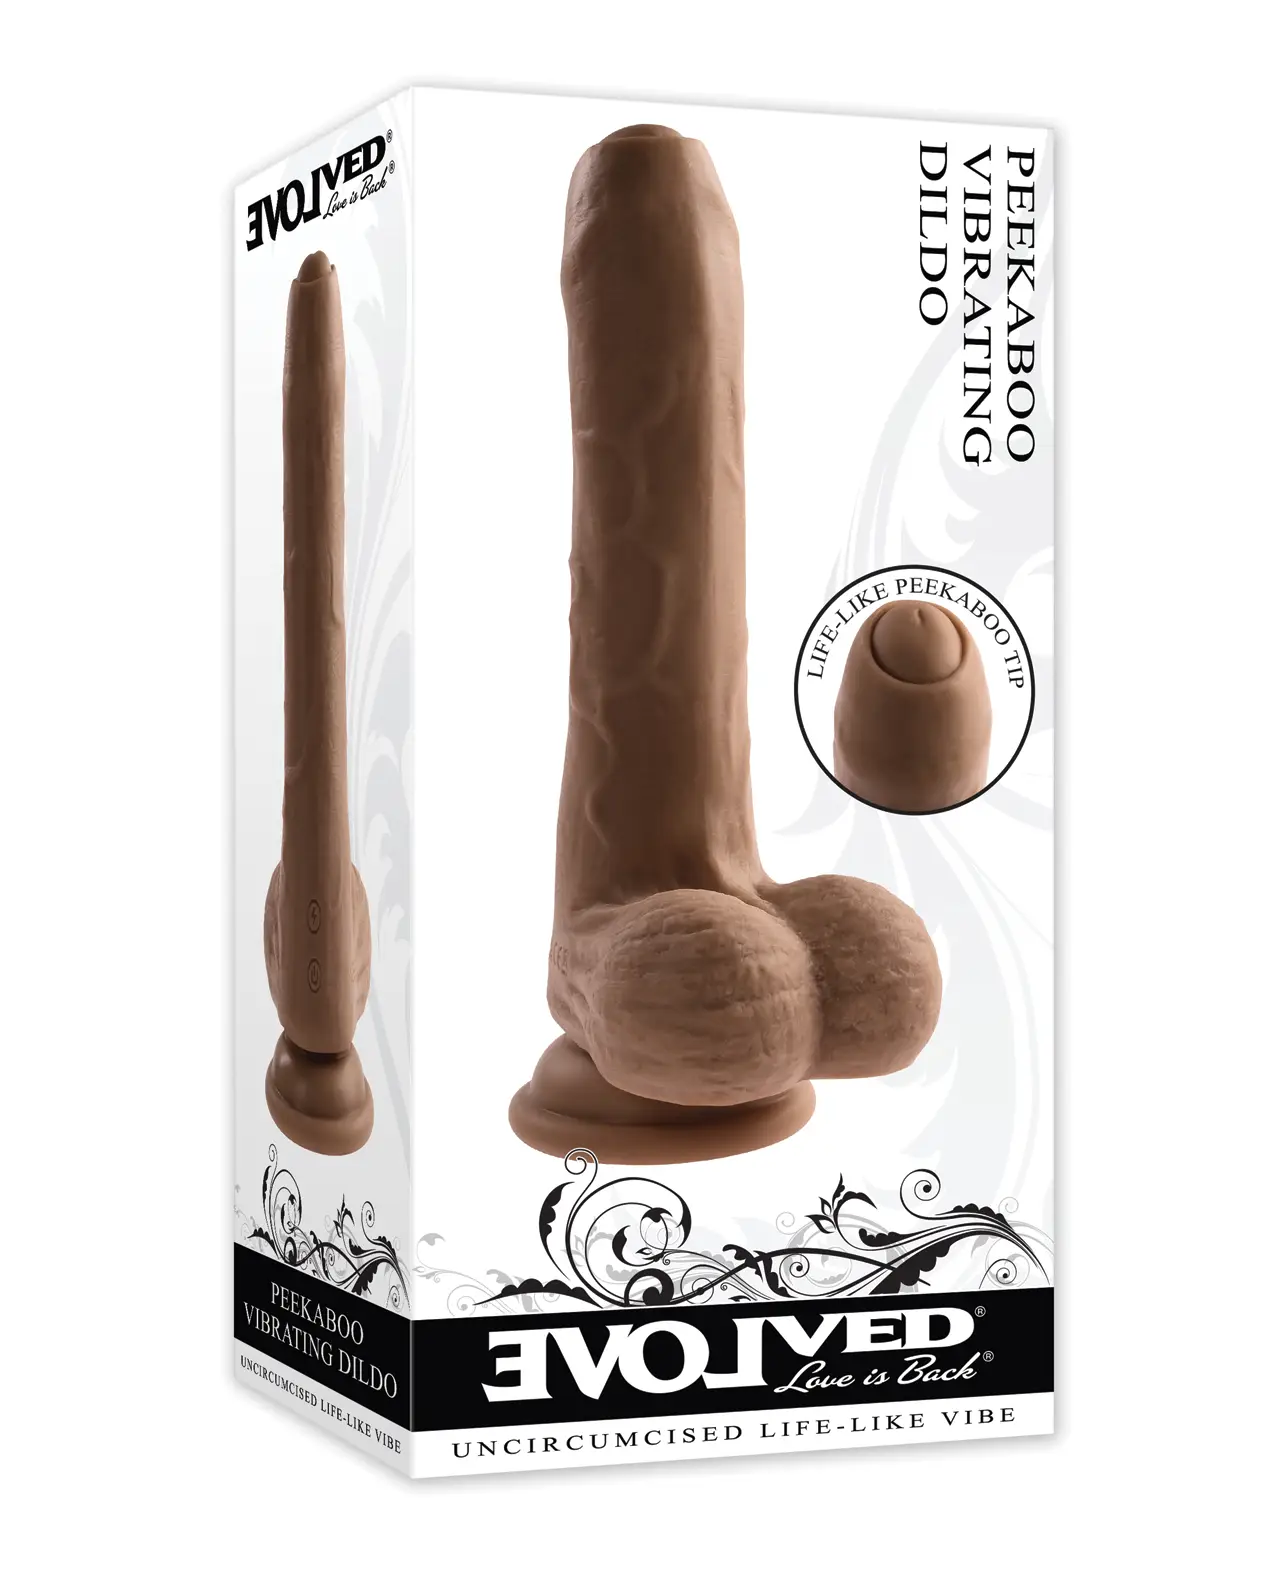 Uncircumcised vibrating dildo in brown on a white box